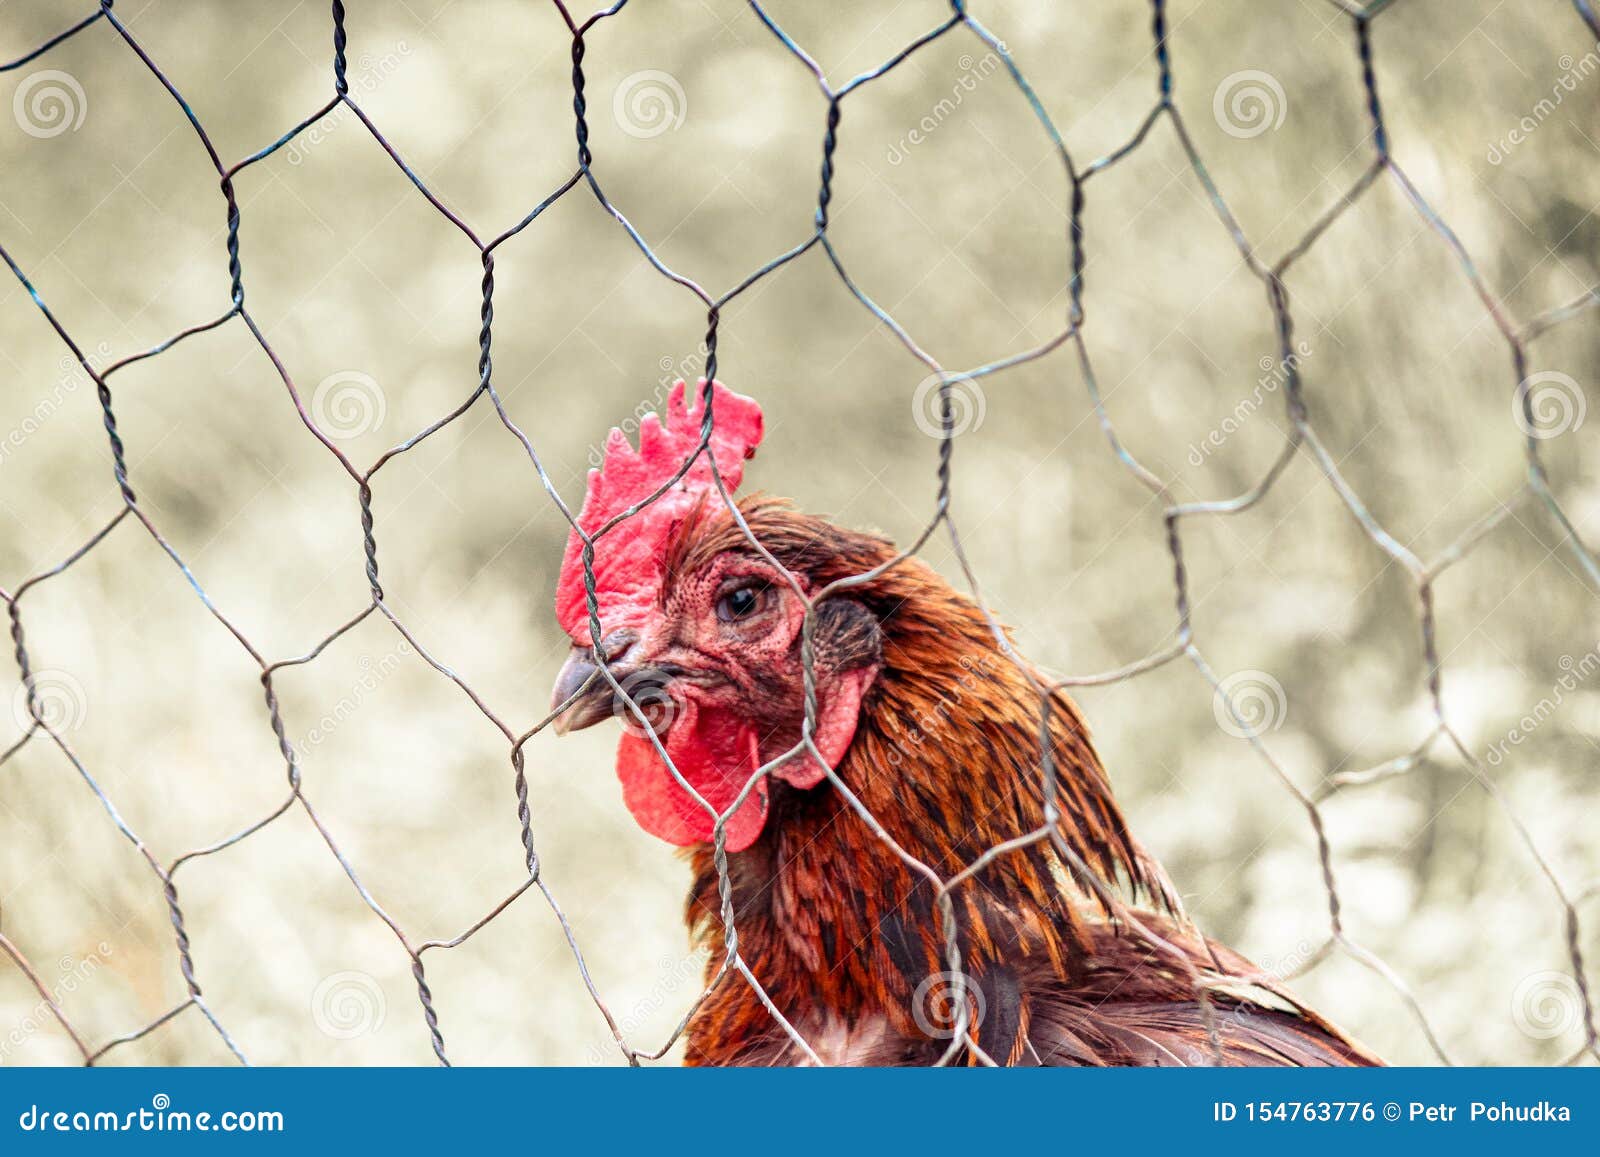 Sad Brown Hen in Chicken Cage. Behind Fence. Animal Abuse, Cruelty To  Animals. Hen Cages, Battery Cage. Chicken Flu, Diseases Stock Photo - Image  of farming, battery: 154763776